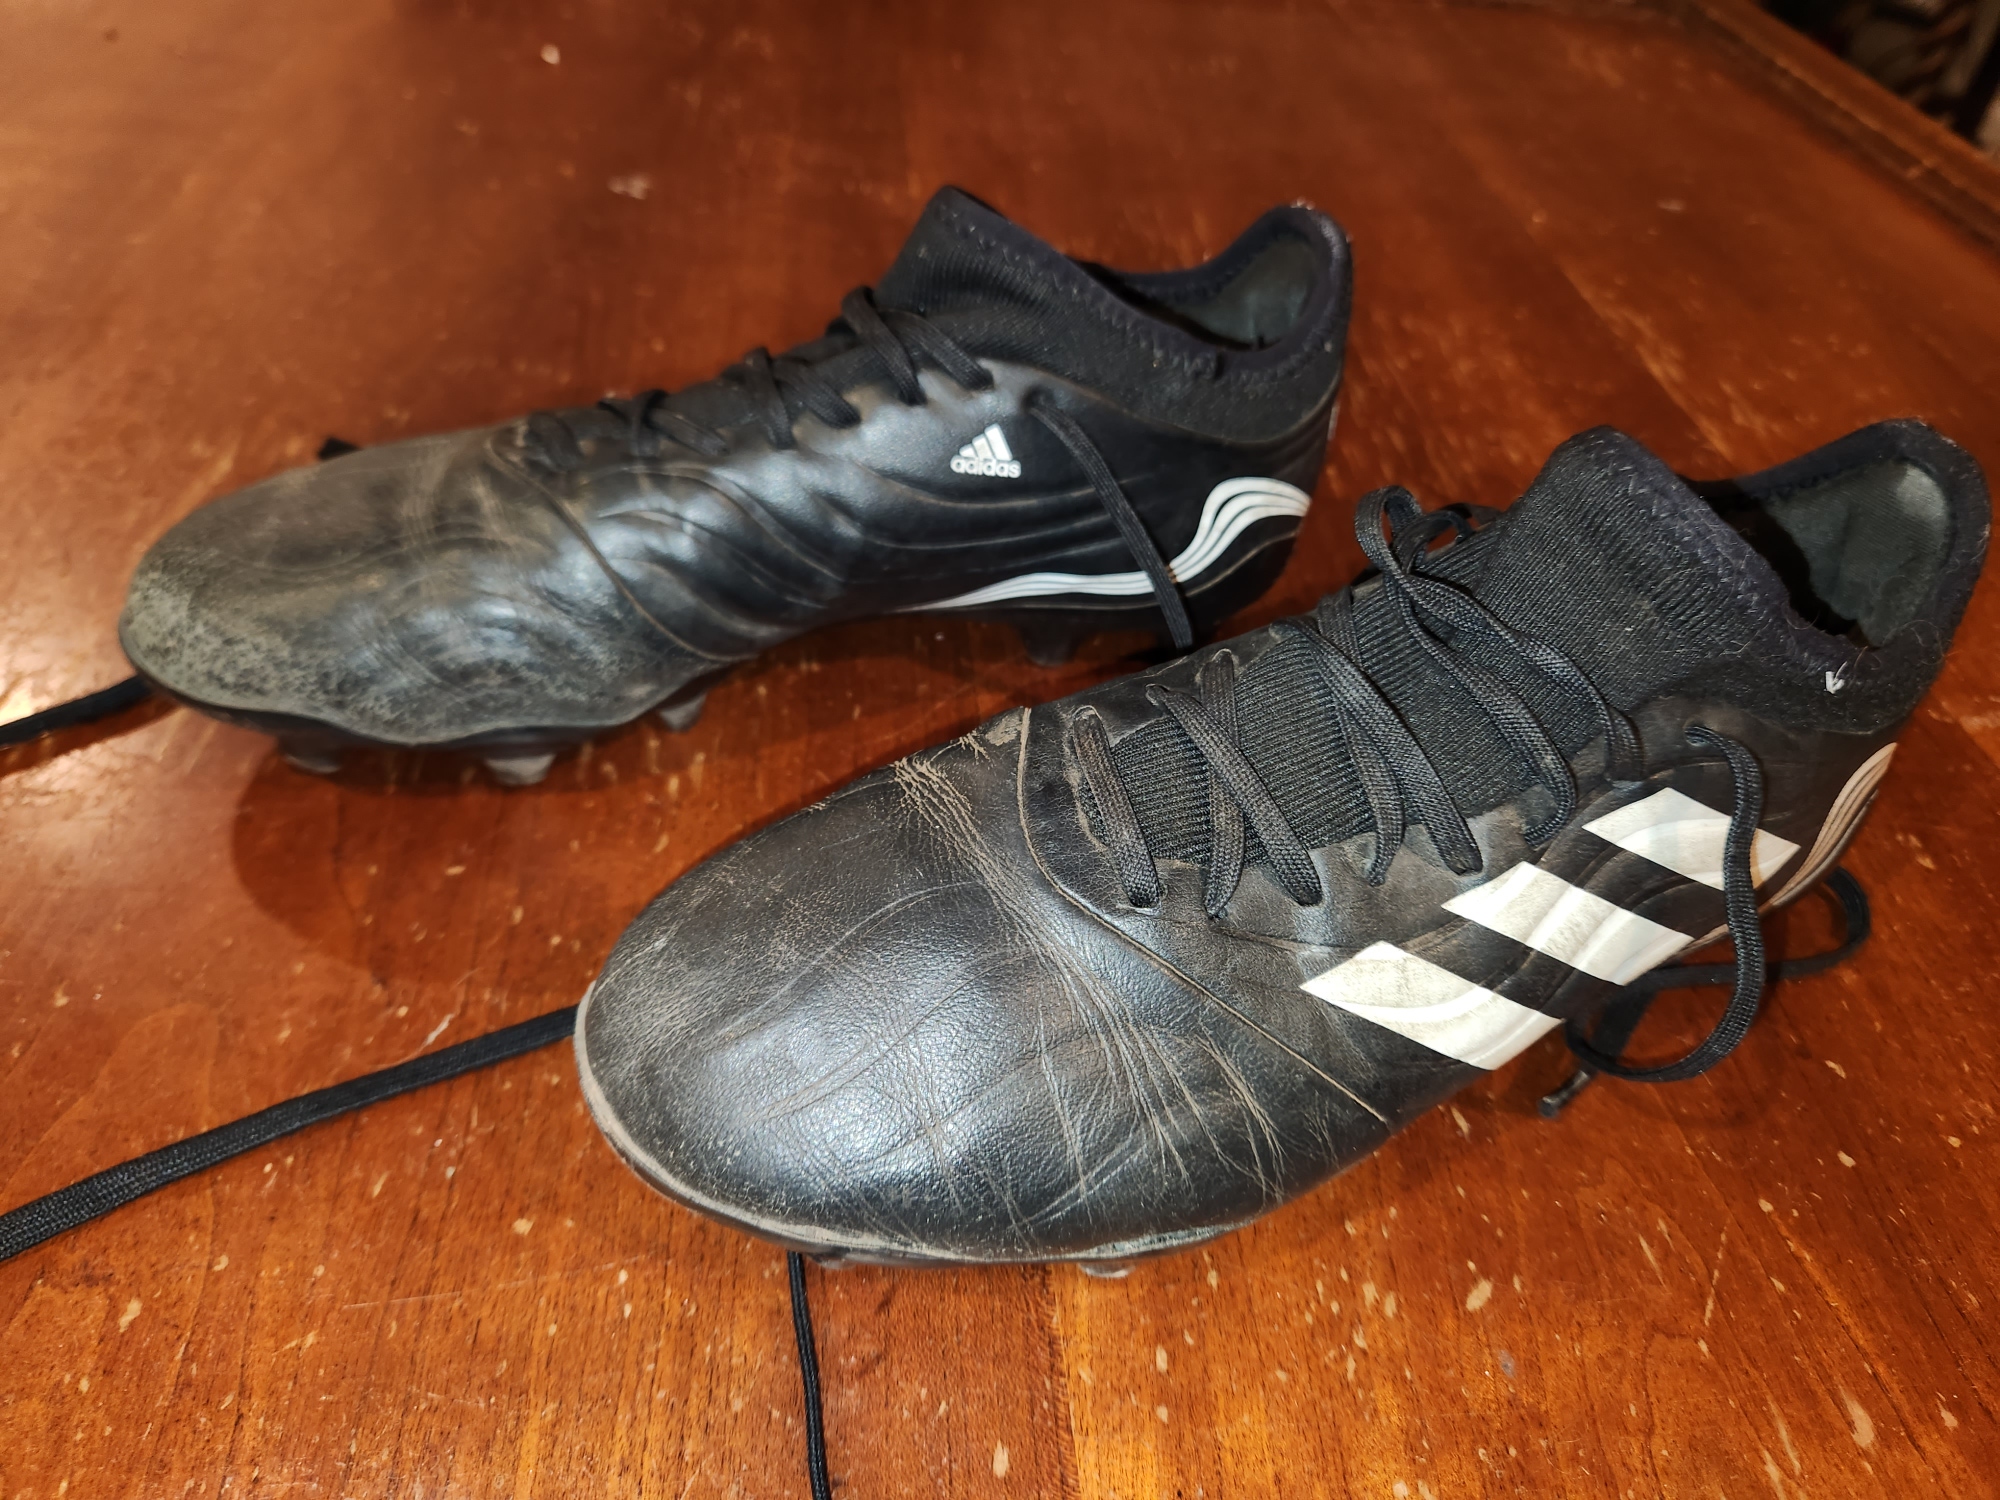 Black Unisex Used Size 7.0 (Women's 8.0) Molded Cleats Adidas Copa Cleats